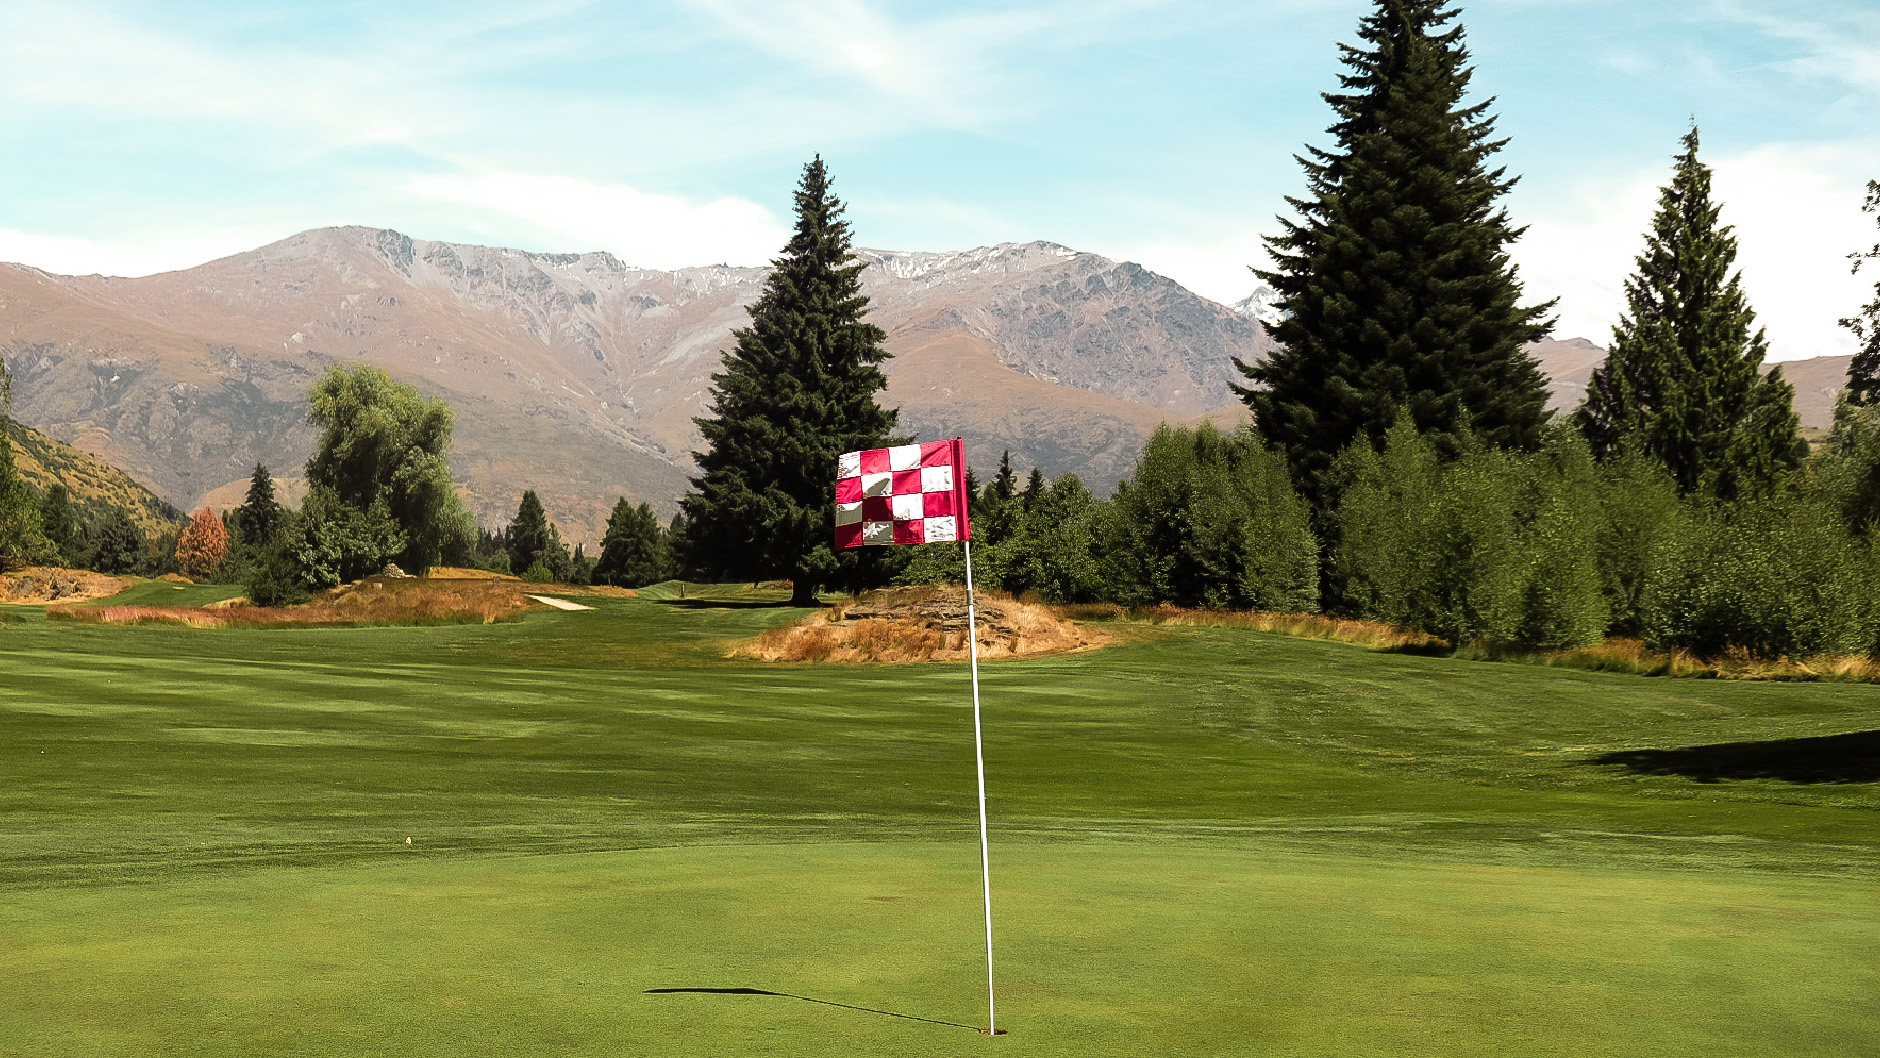 Come and experience a fantastic and challenging game of golf at Arrowtown Golf Club – One of the best and most picturesque courses in New Zealand!